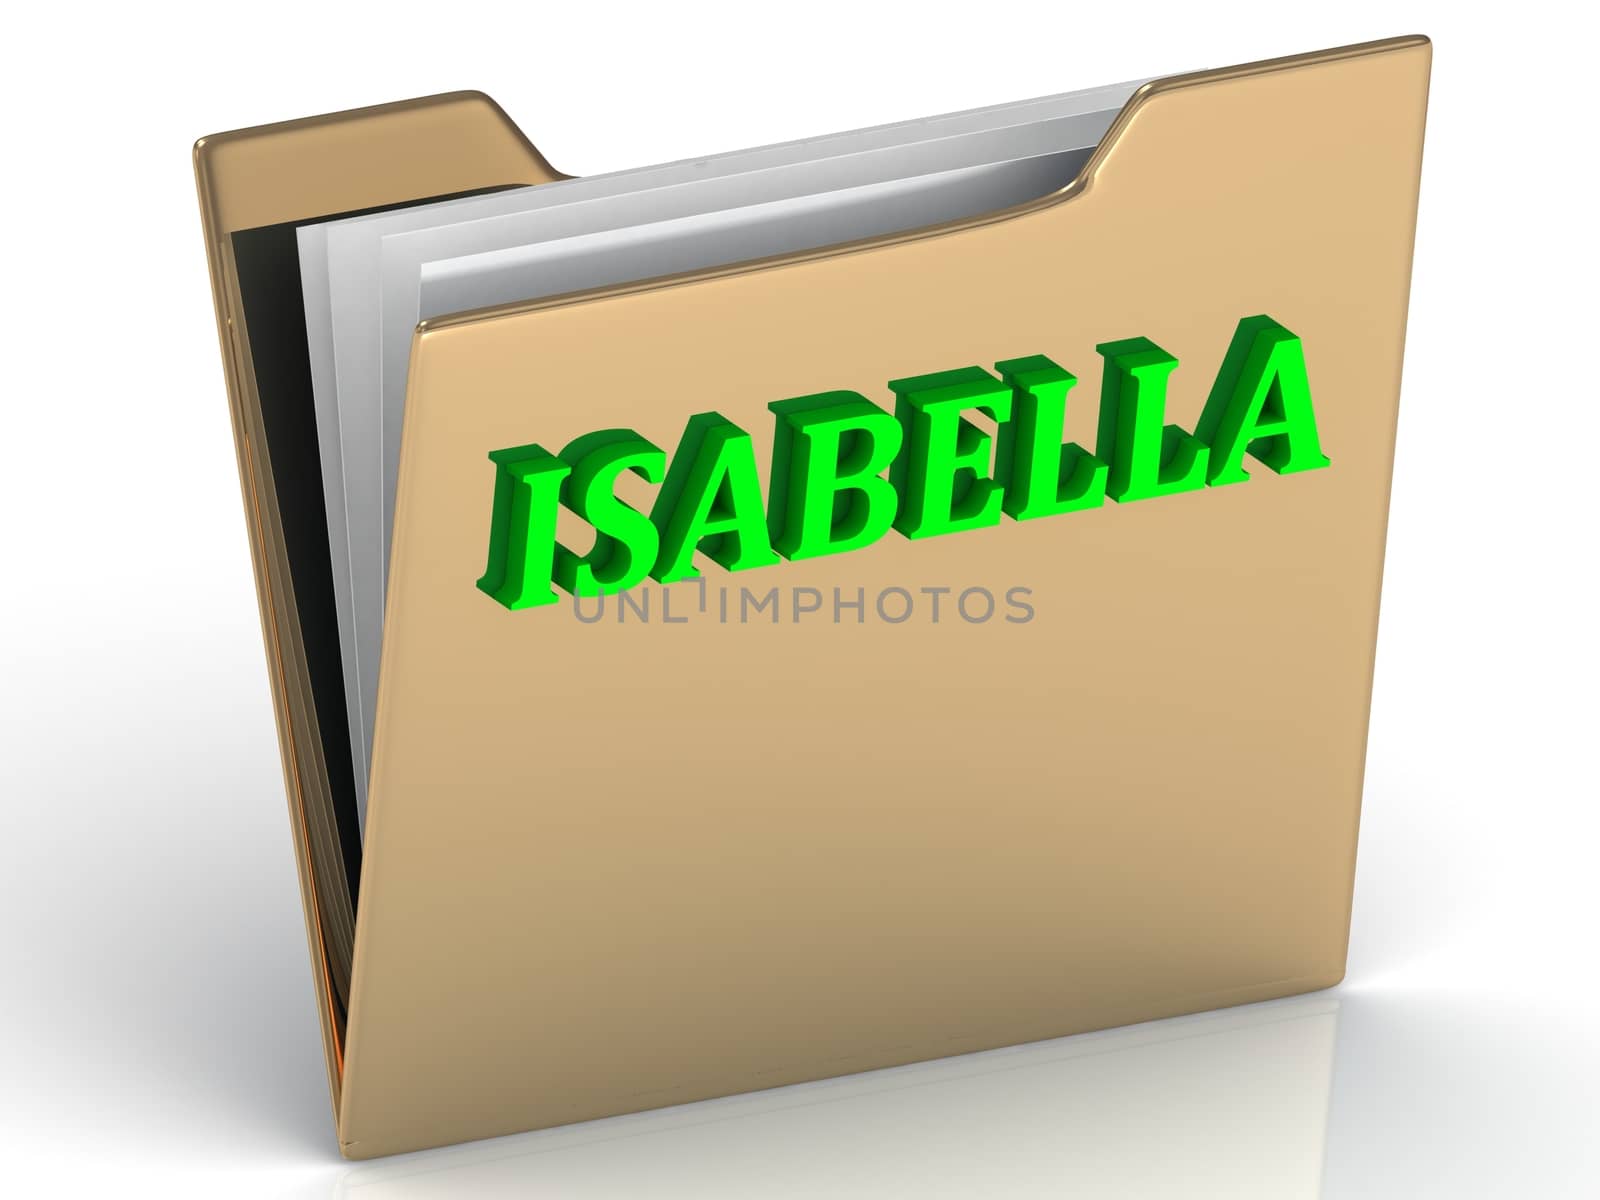 ISABELLA- bright green letters on gold paperwork folder on a white background